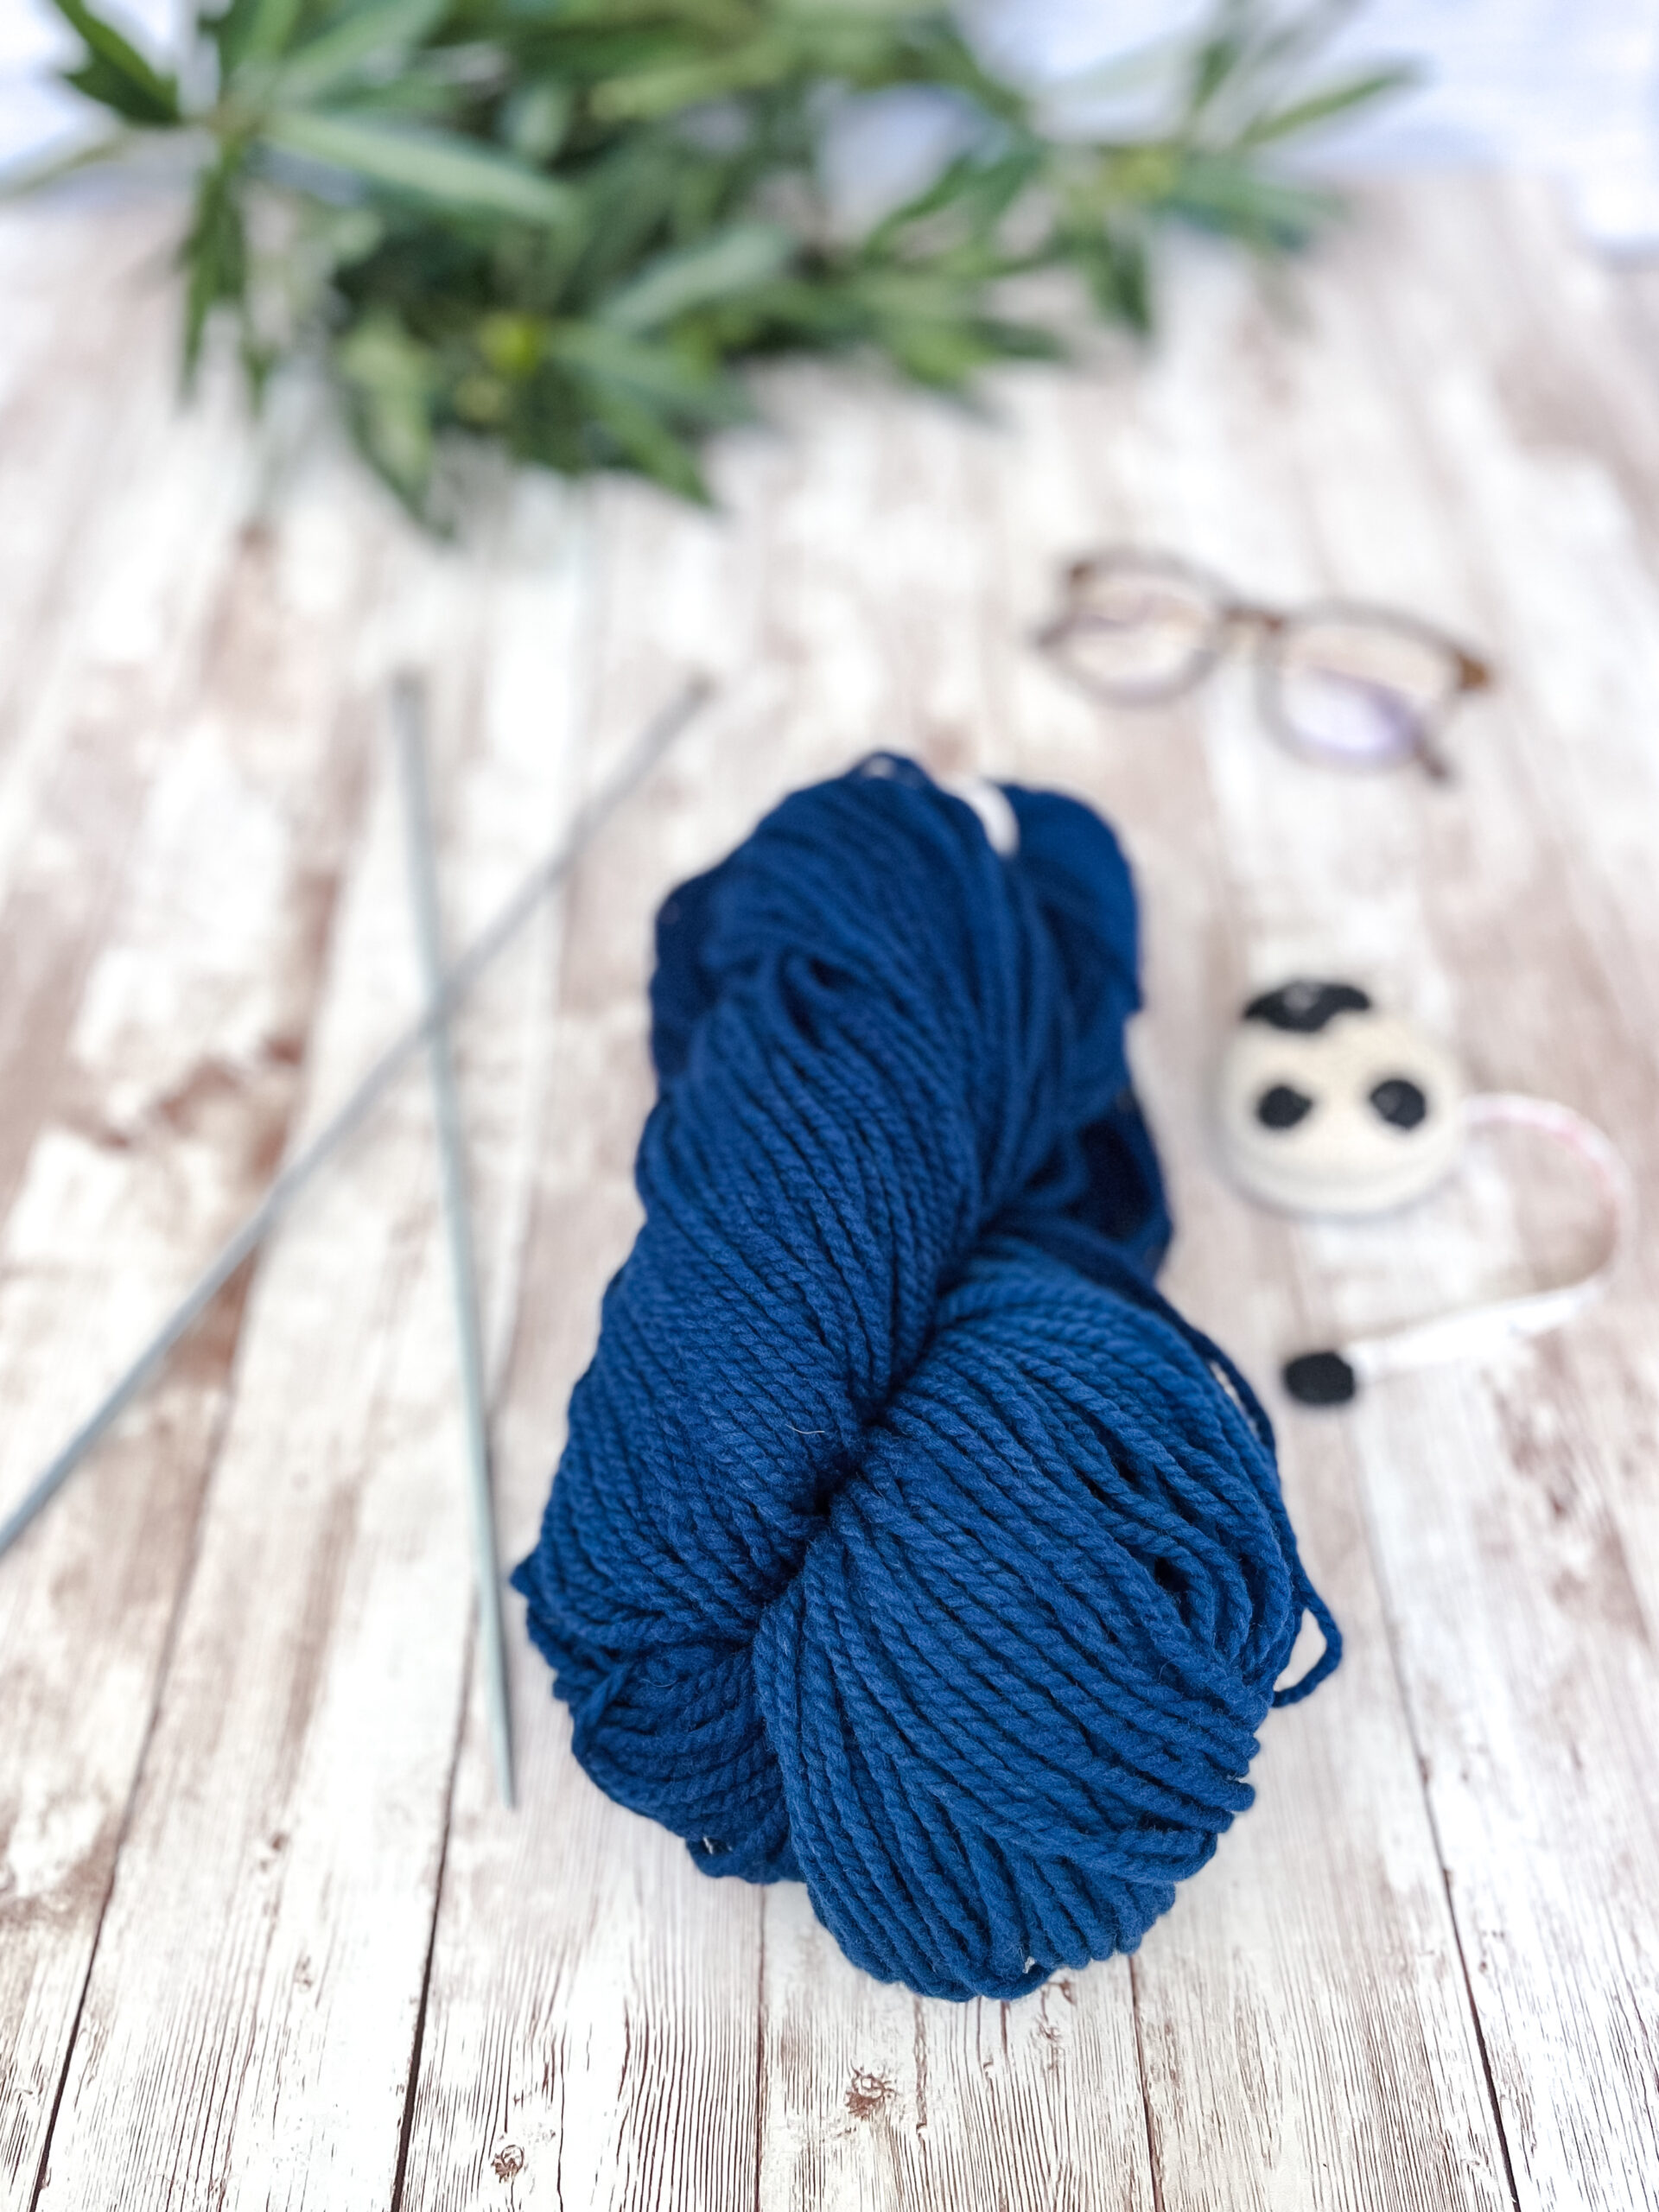 A hank of blue, Virginia farmed fine merino yarn rests on a wood plank, with knitting needles, a sheep measuring tape, a pair of reading glasses, and some greenery around it